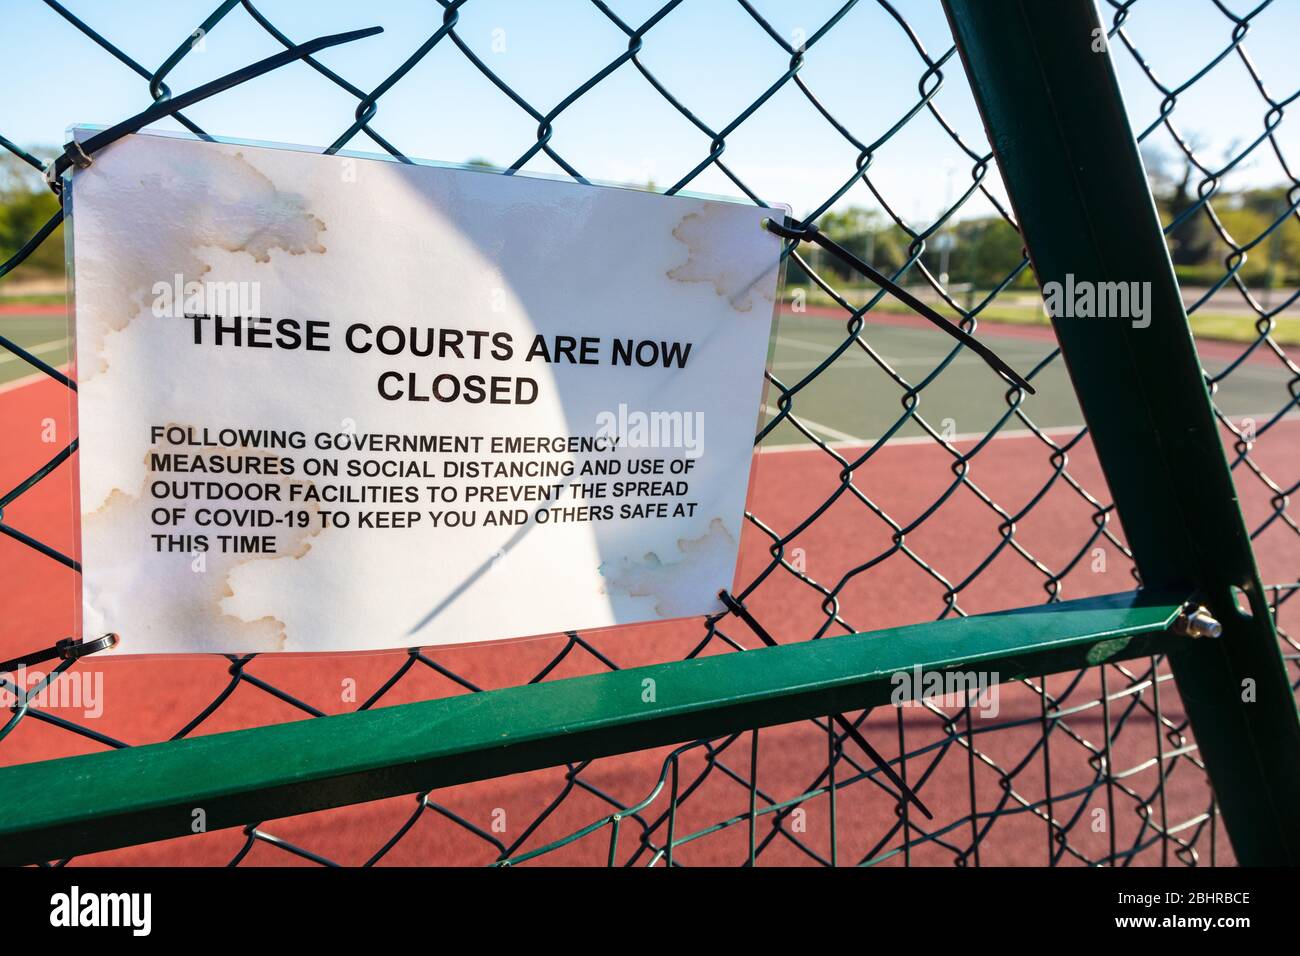 Tennis Courts Closed Sign Due to Coronavirus COVID-19 Pandemic Stock Photo